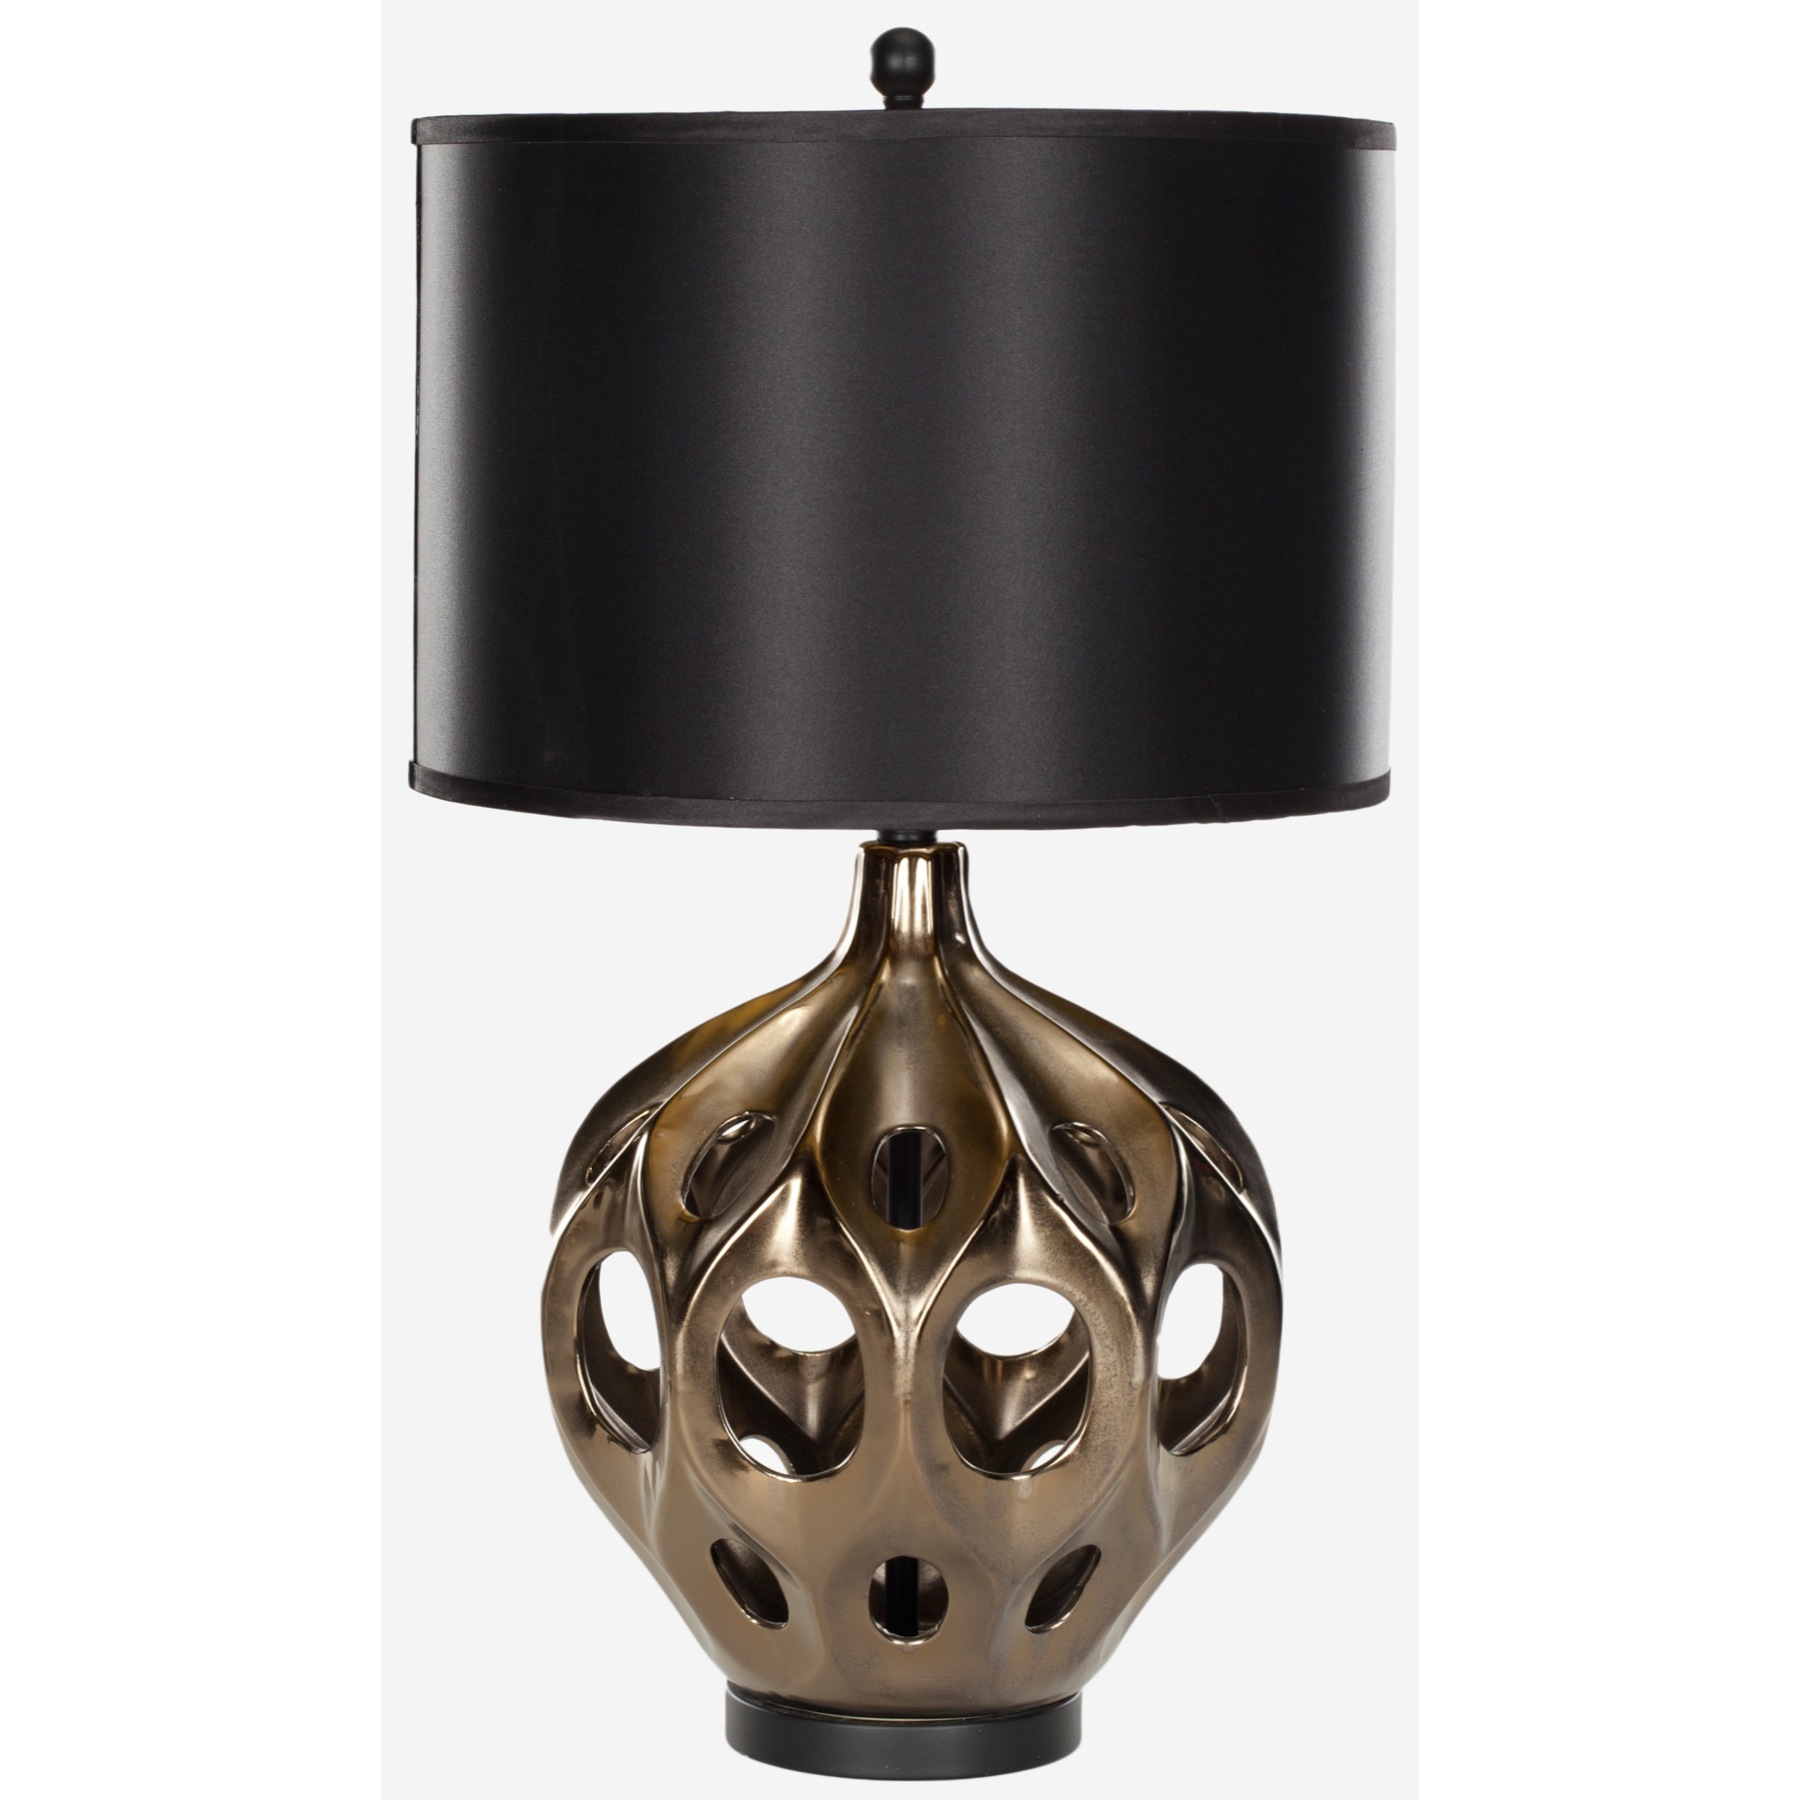 Safavieh Cermaic Table Lamp Copper Hole with Black Satin Shade